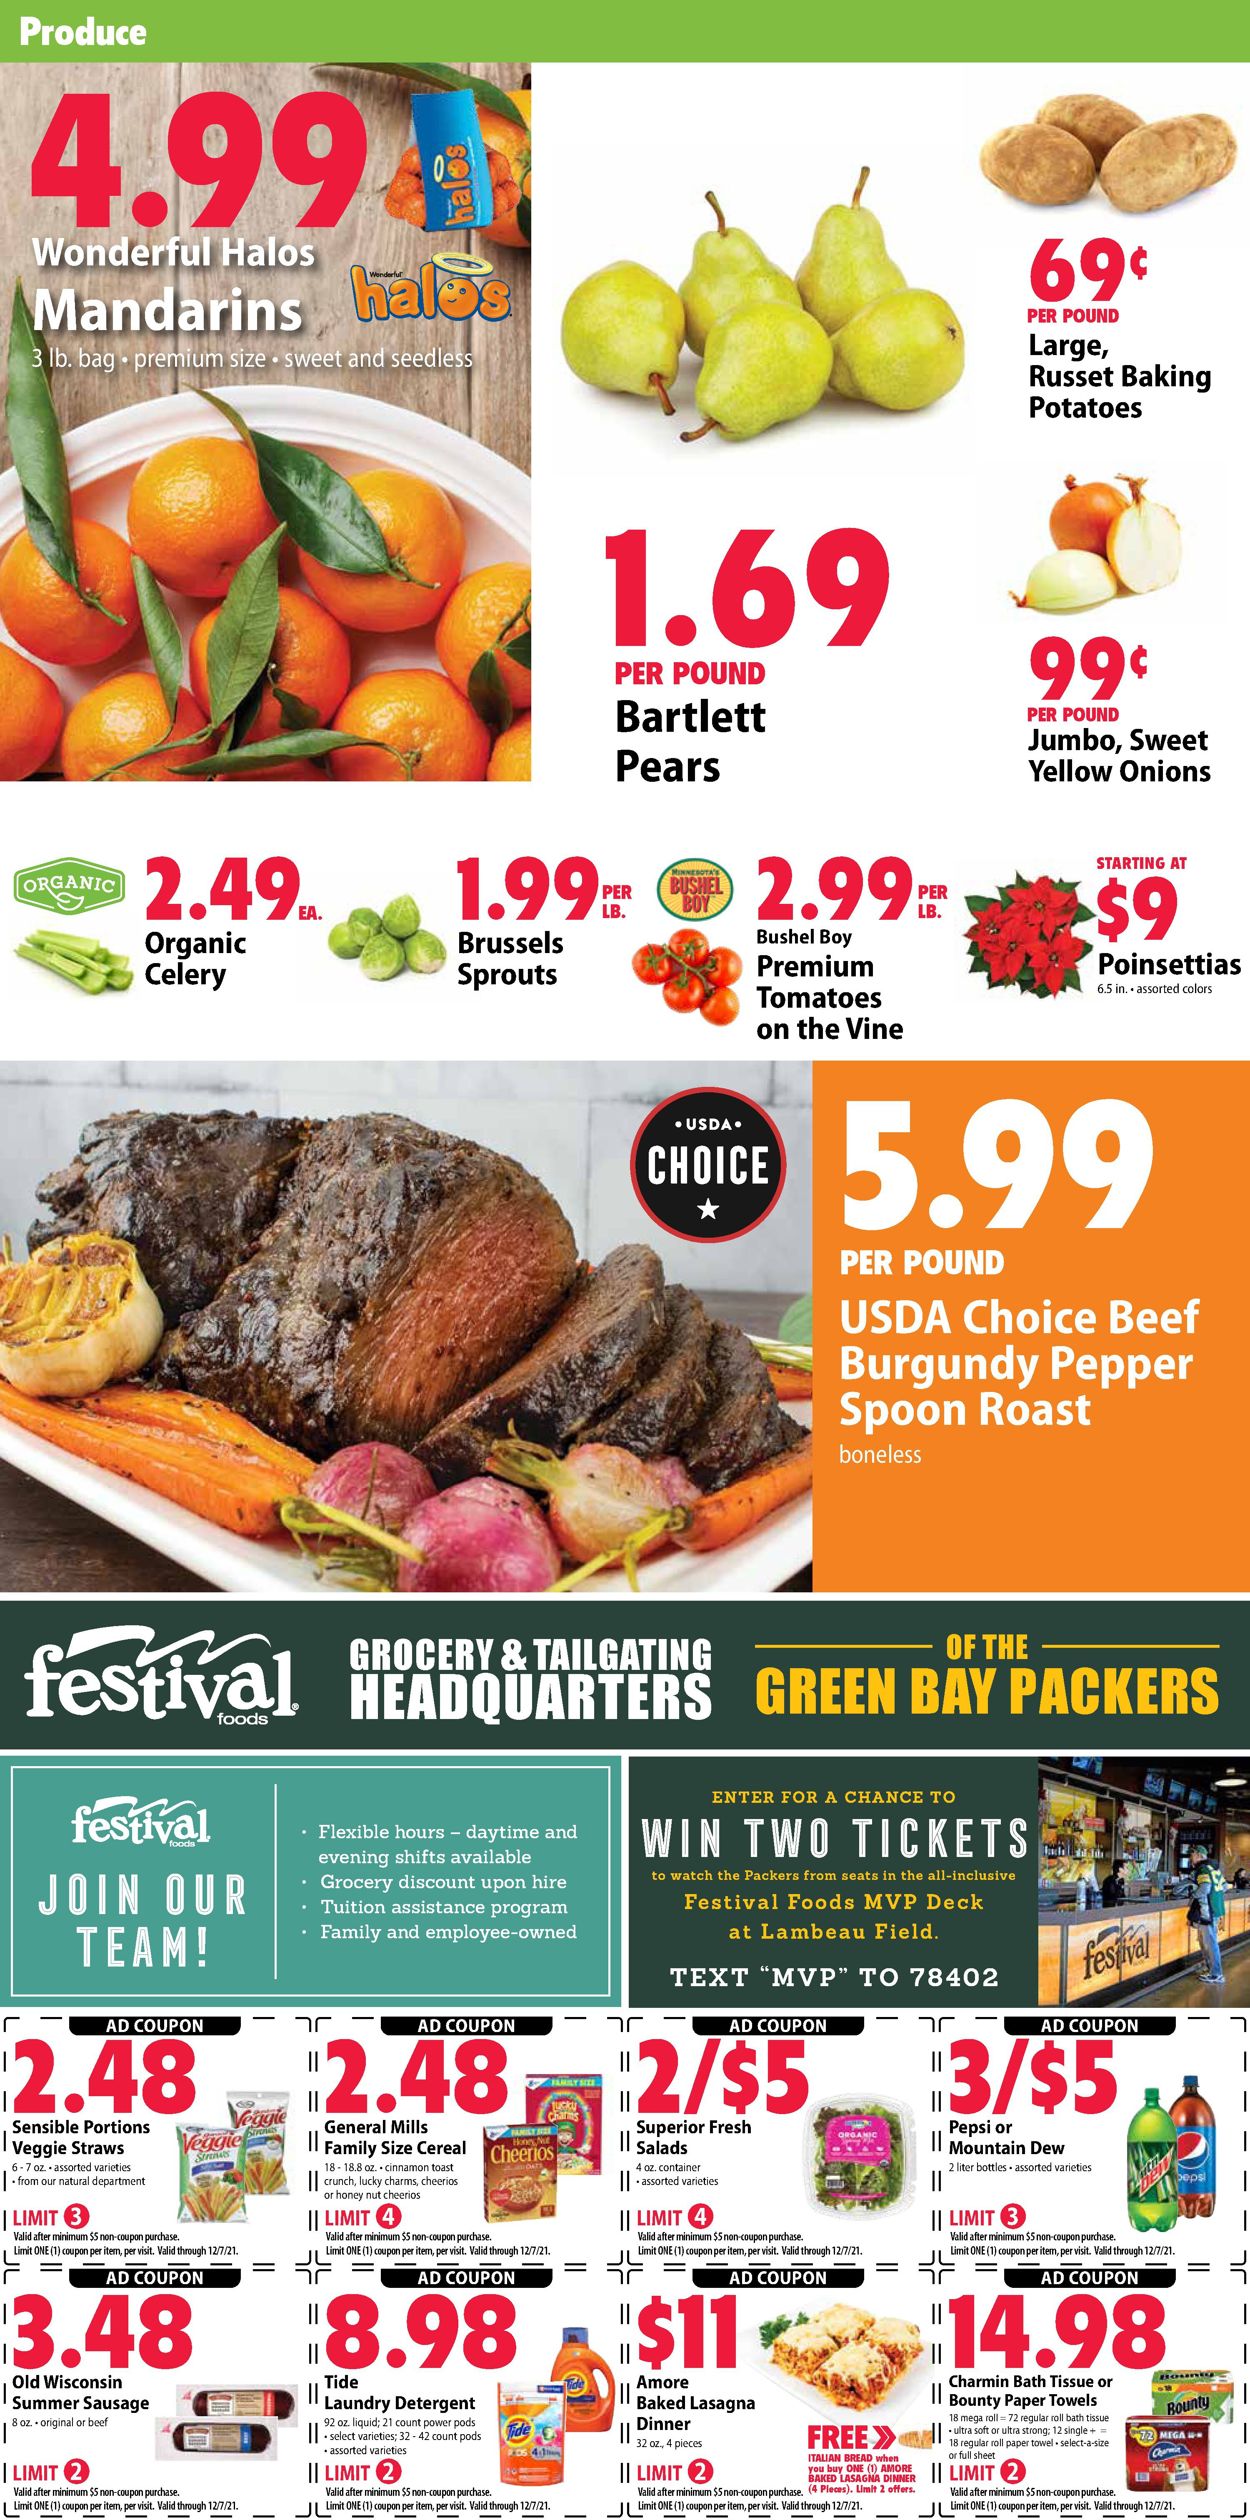 Festival Foods HOLIDAYS 2021 Weekly Ad Circular - valid 12/01-12/07/2021 (Page 8)